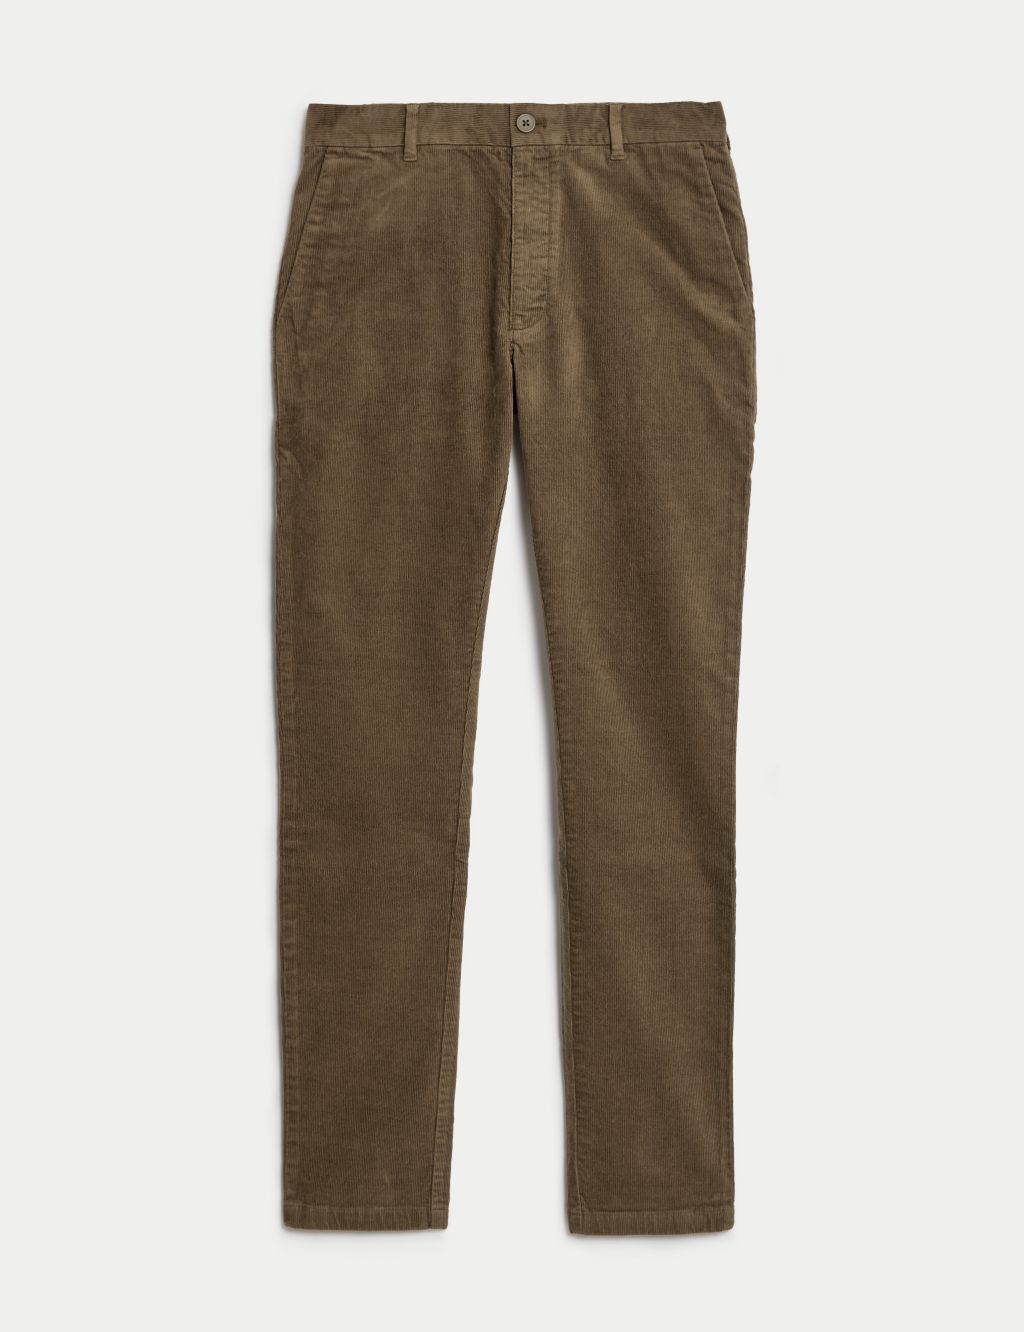 Slim Fit Corduroy Stretch Chinos | M&S Collection | M&S